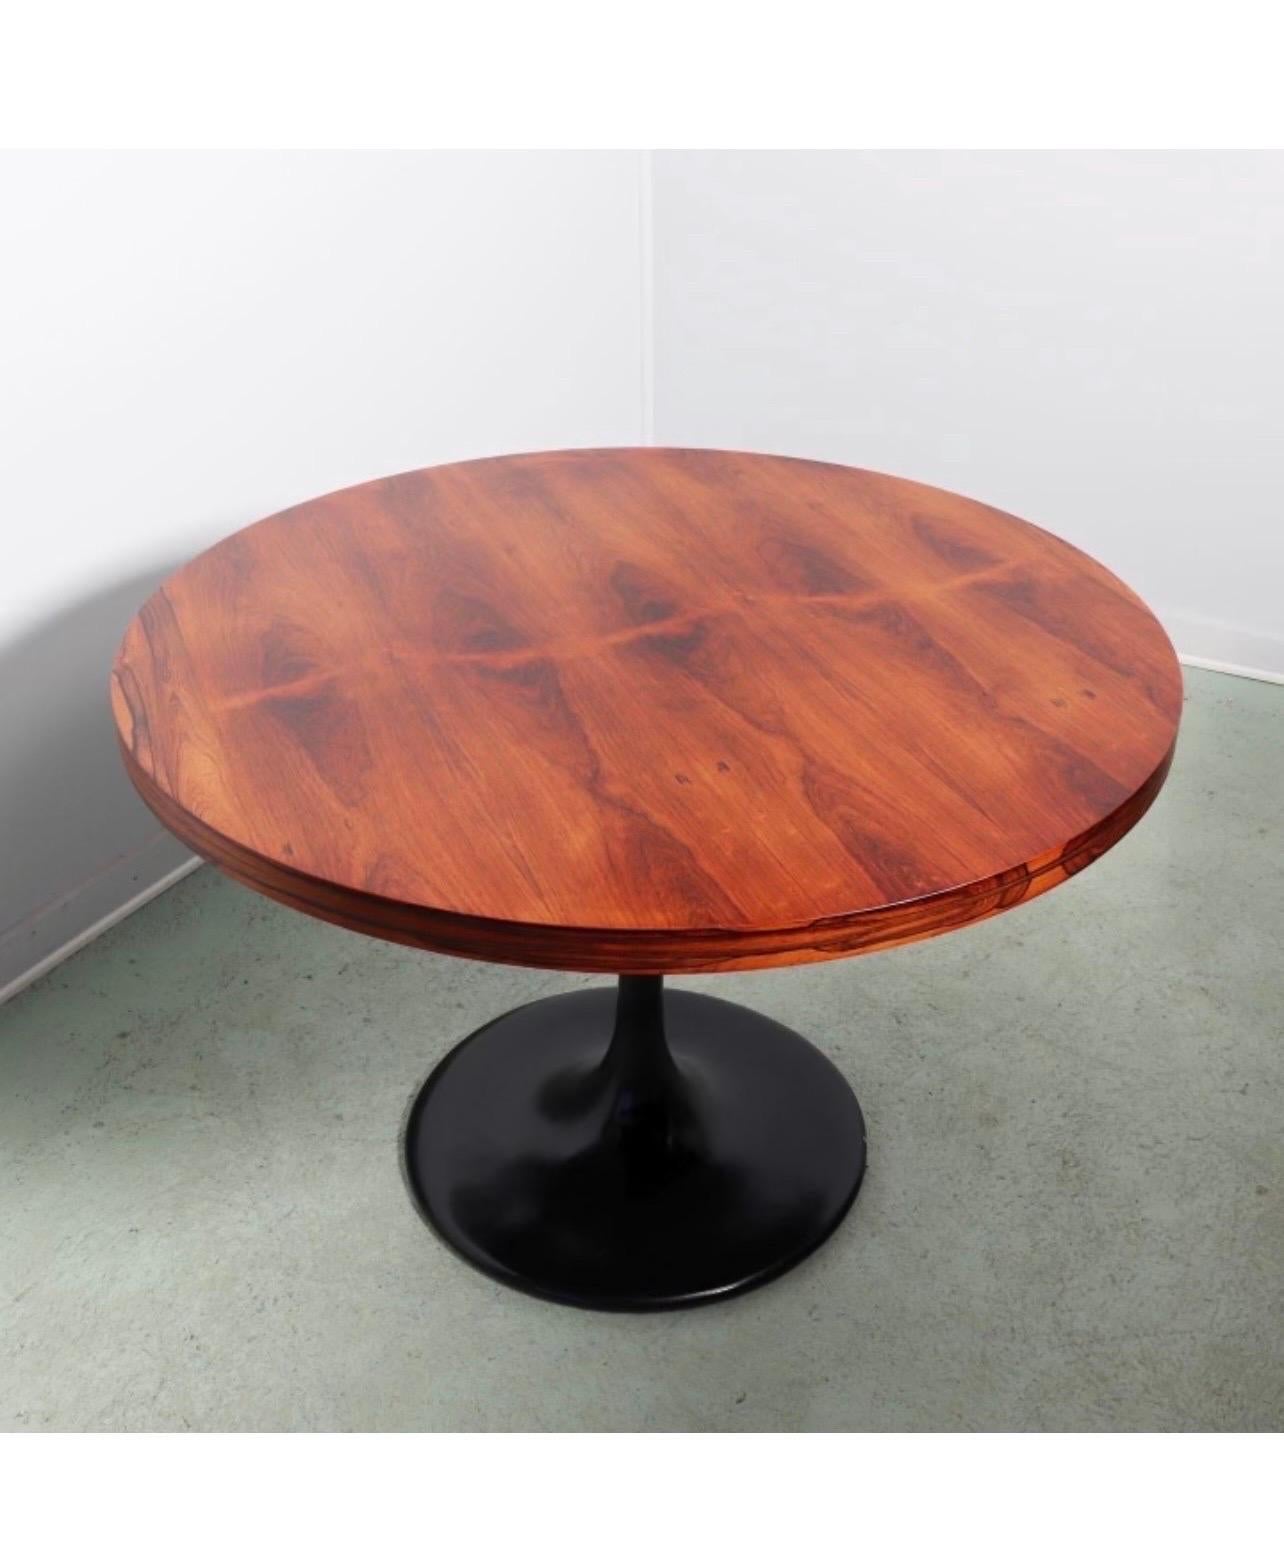 Elegant rosewood round dining table by Milo Baughman that is supported by a black tulip base for enhanced leg room and overall style. This sleek round rosewood wonder can be used as a dining table or foyer table. The 30